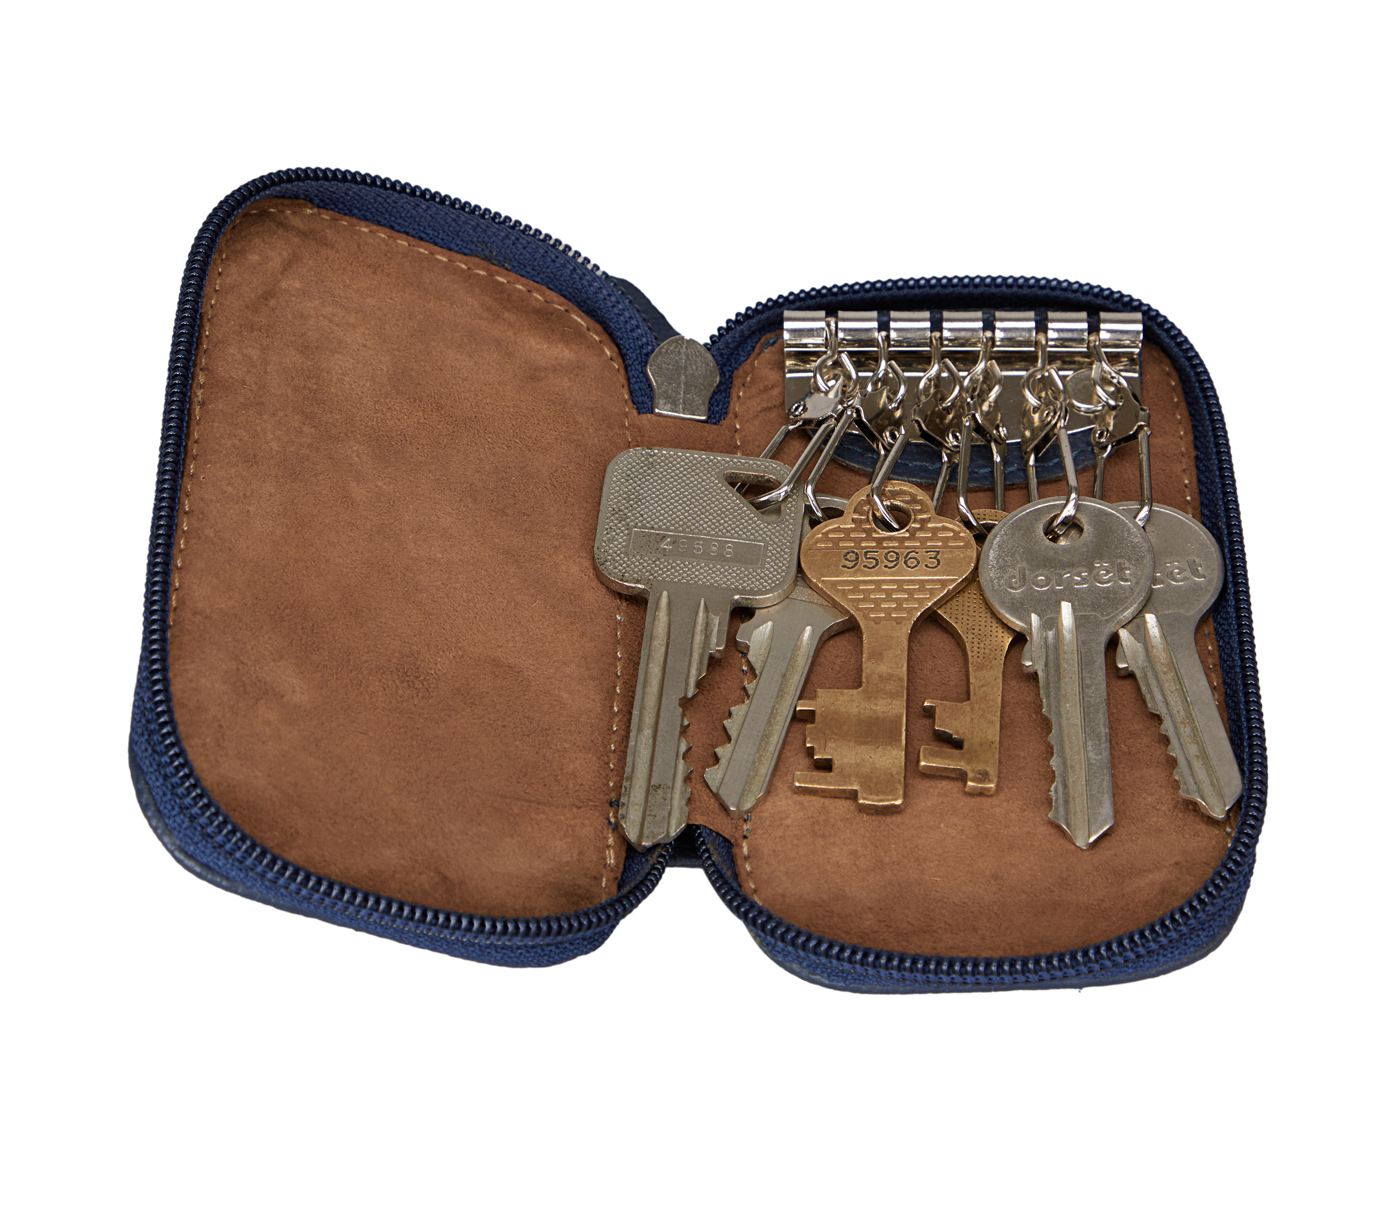 W55--Keycase with zipper closing in Genuine Leather - Blue